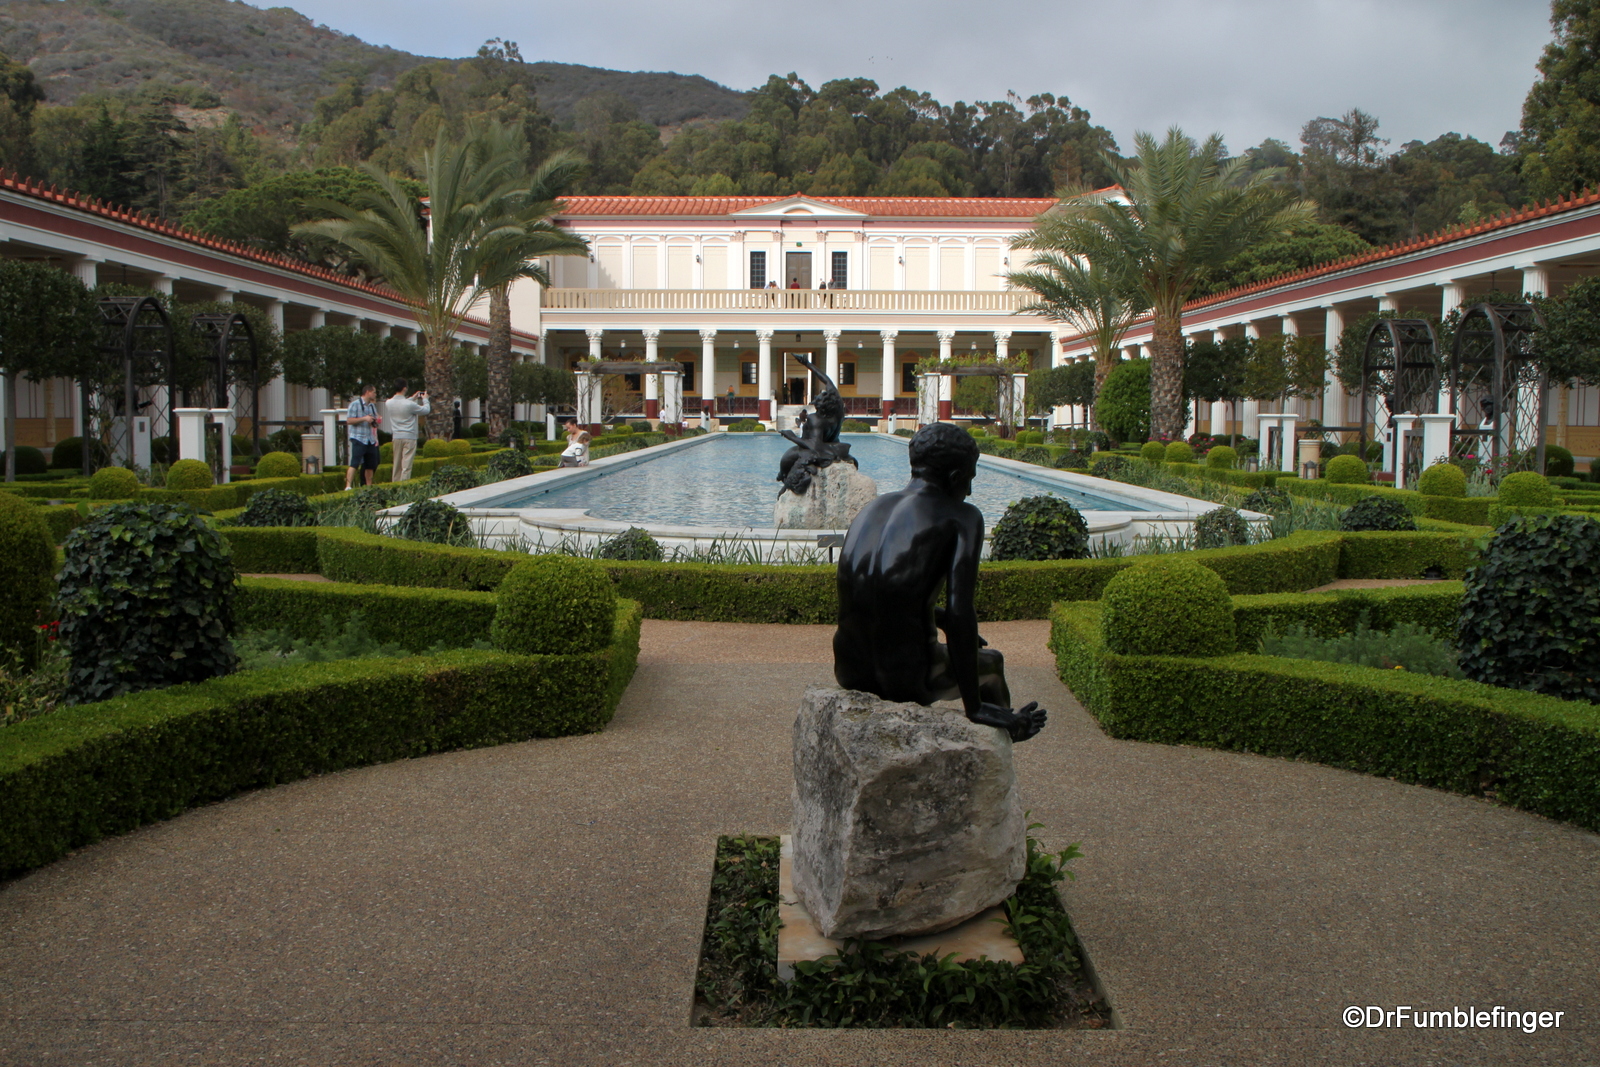 Outer Peristyle, Getty Villa. A typically Roman era collection of plants, statues, walkways and pool